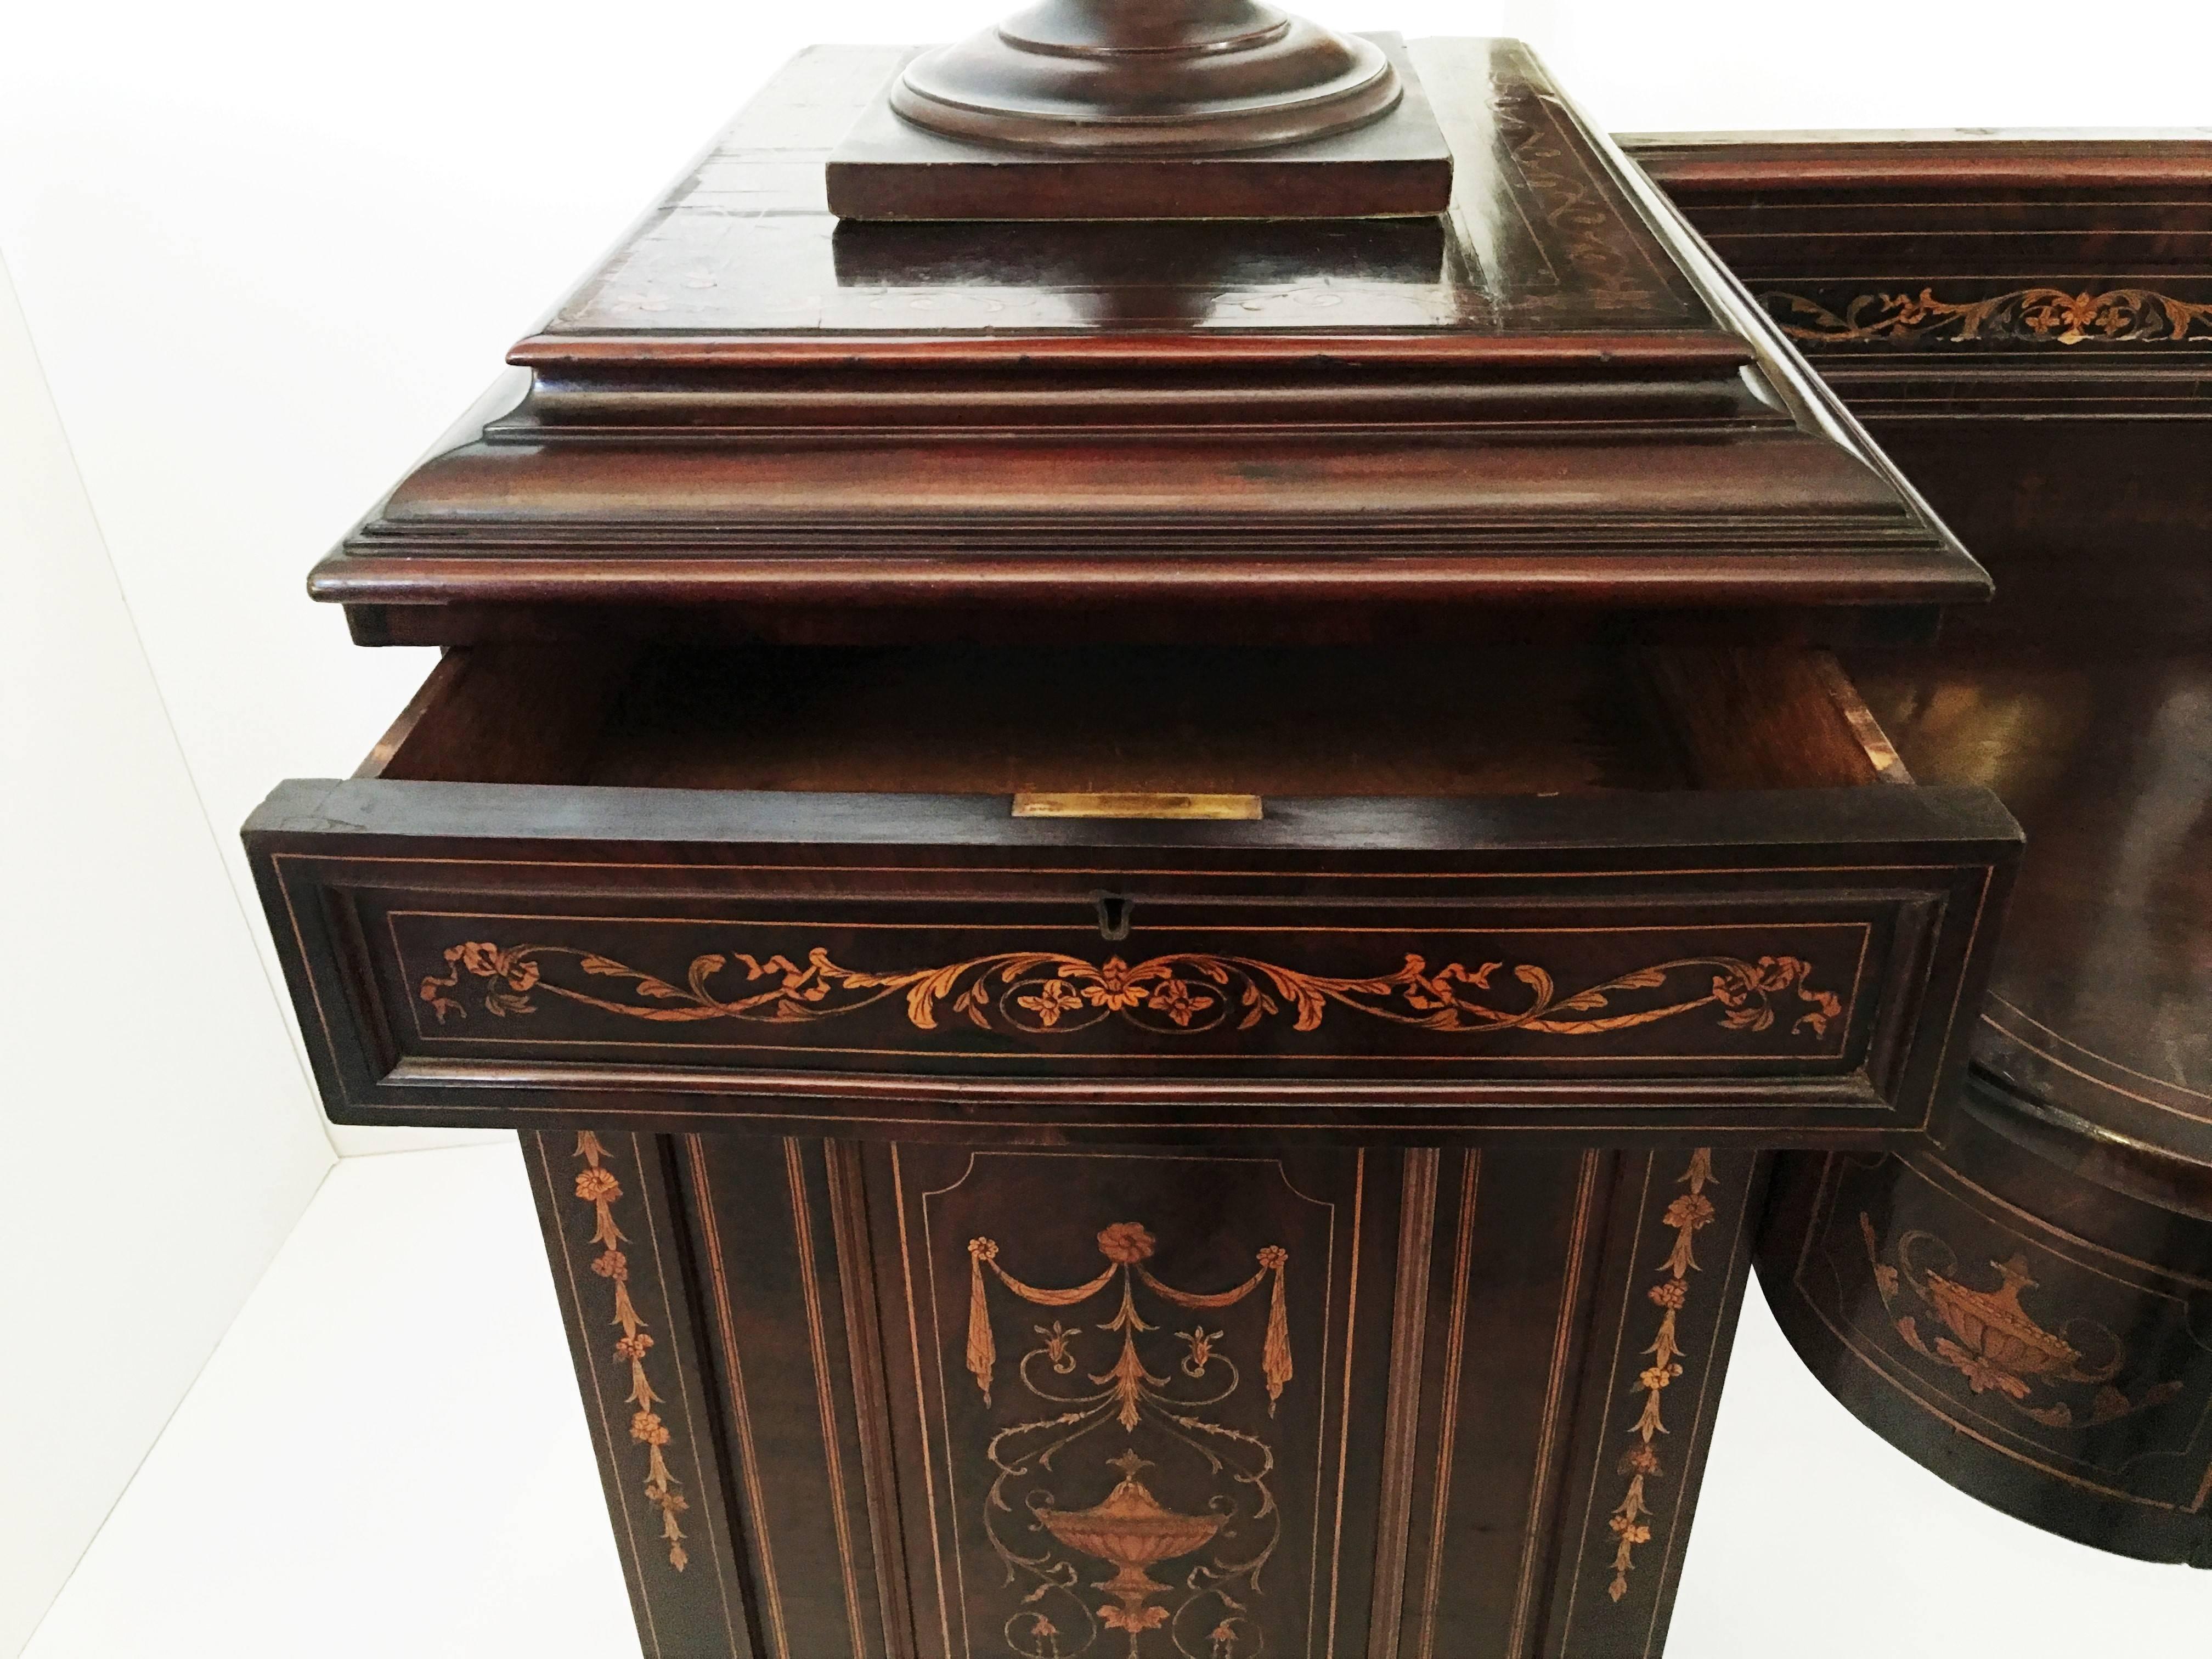 Early 19th Century Regency Marquetry Inlaid Rosewood Pedestal Sideboard with Urn For Sale 5